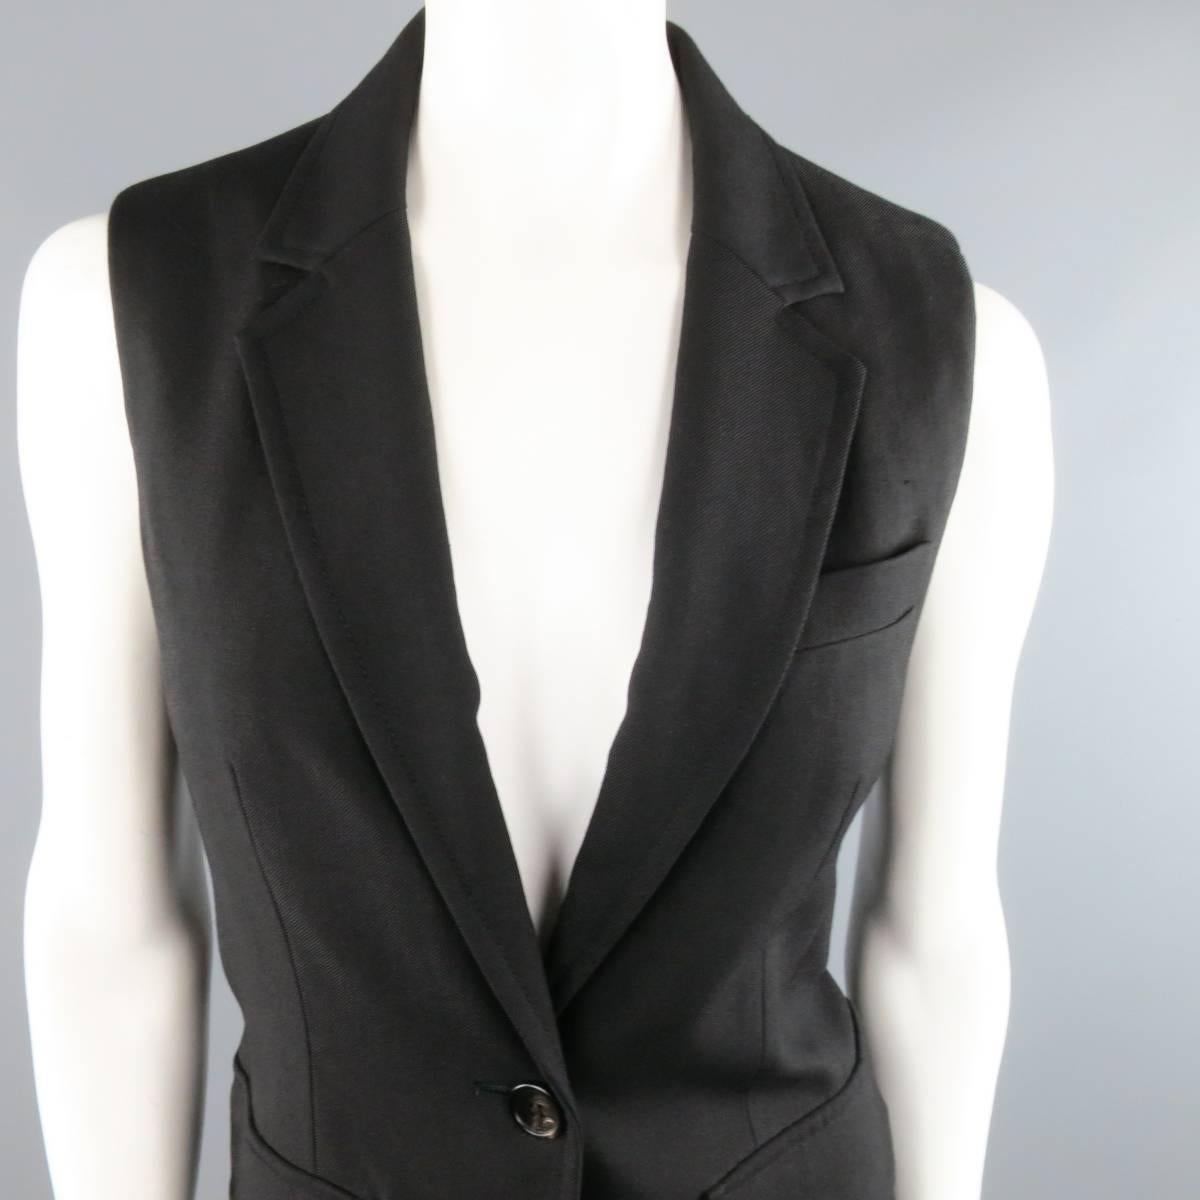 PHILLIP LIM sleeveless sport coat style vest in a virgin wool bend twill featuring a notch lapel, single button closure, and double patch flap pockets.
 
Good Pre-Owned Condition.
Marked: 6
 
Measurements:
 
Shoulder: 14 in.
Bust: 37 in.
Length: 28